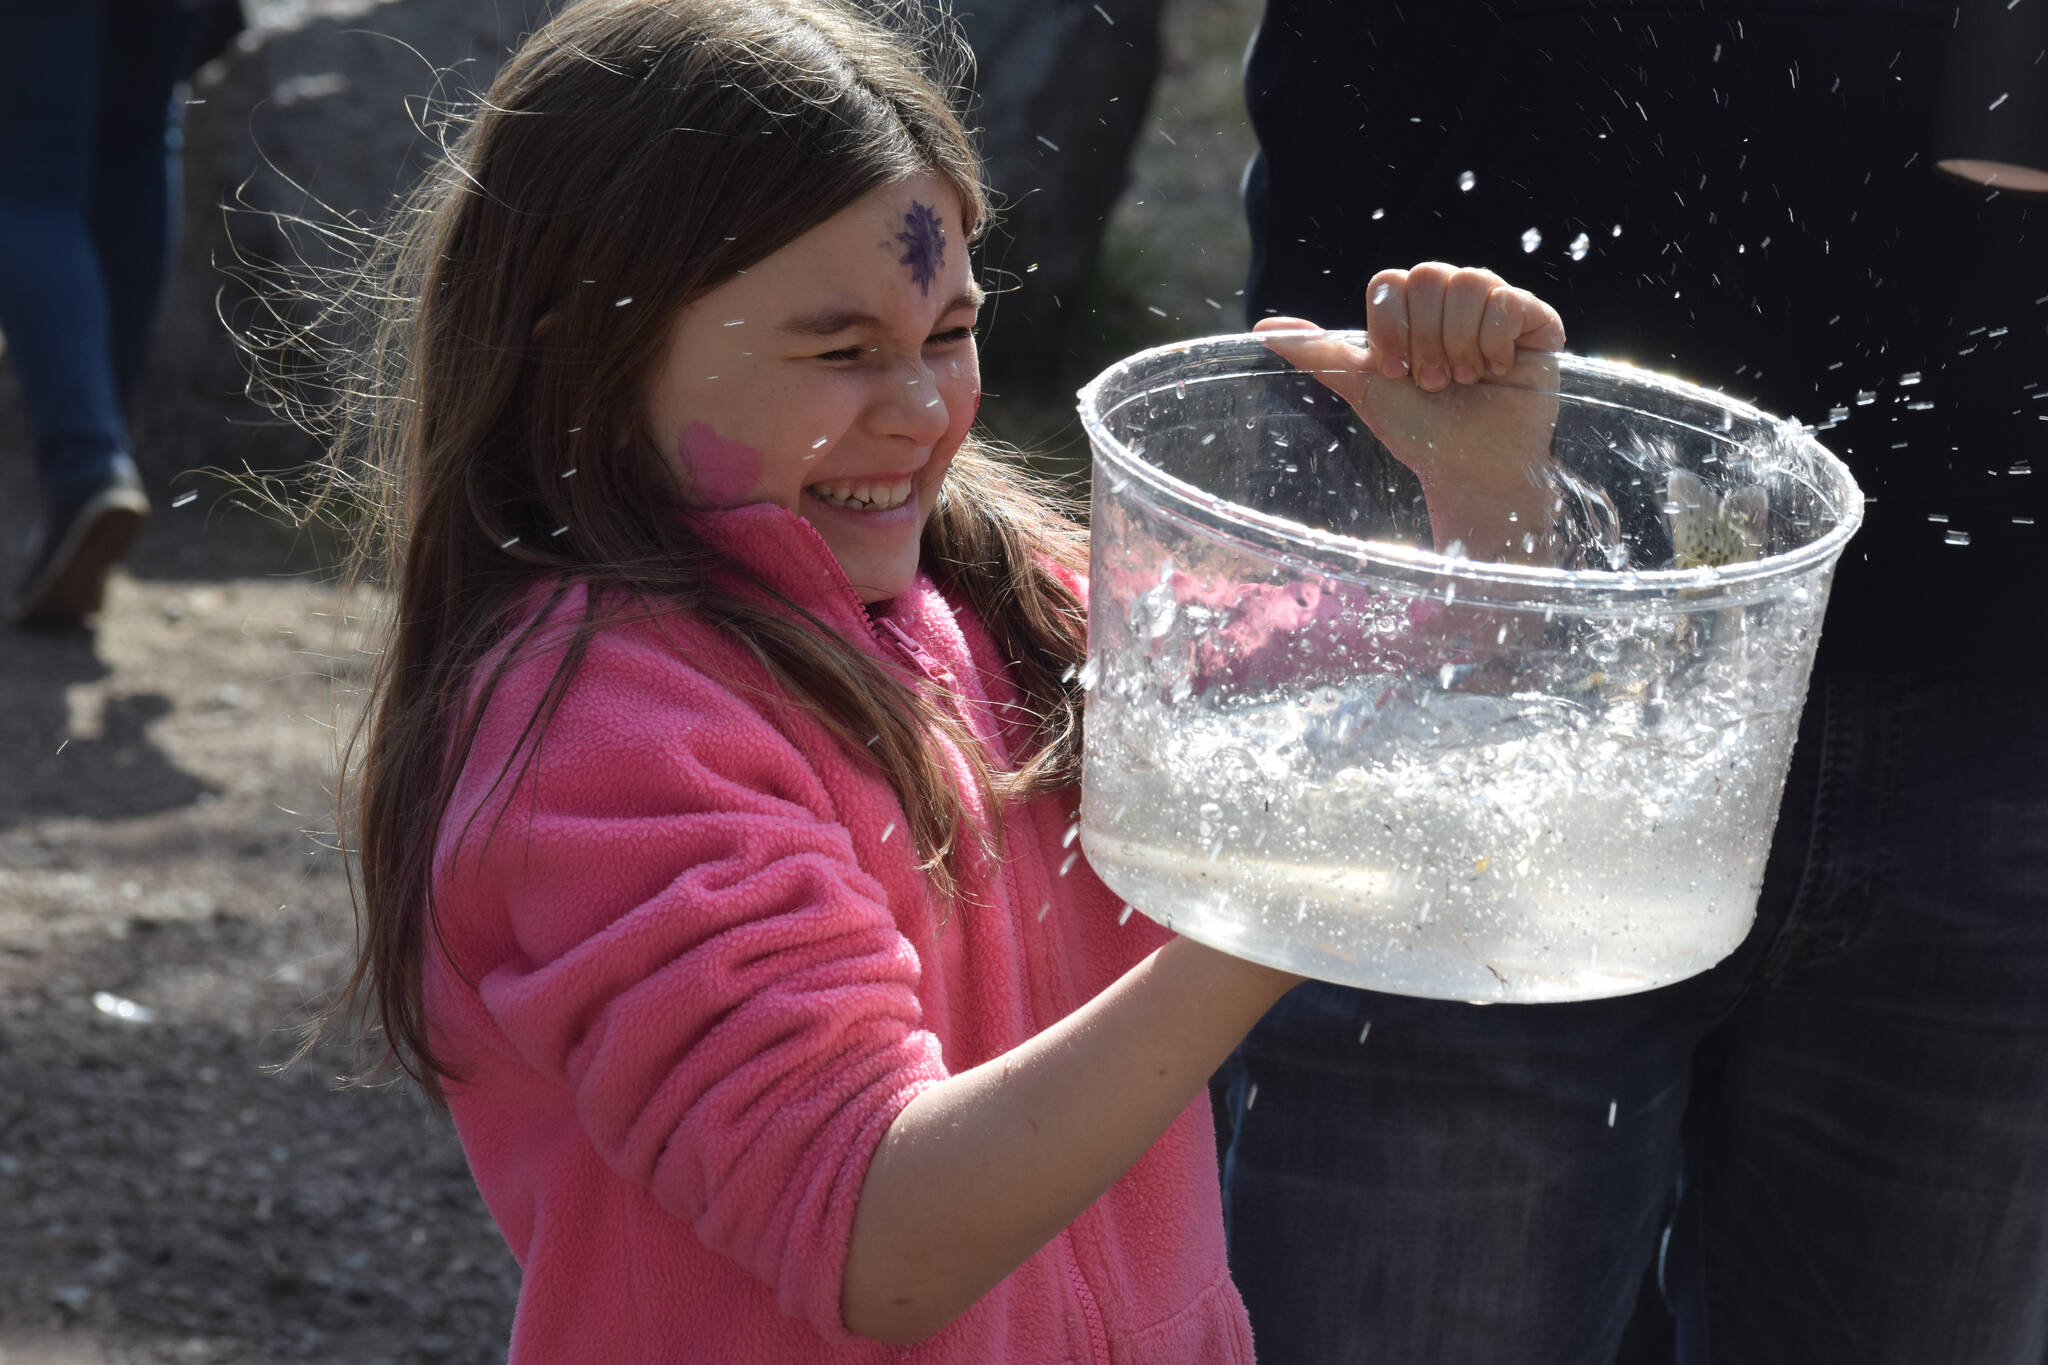 Presley Jackson waits in line before releasing her rainbow trout at the 21st annual Kenai Peninsula Salmon Celebration in Kasilof on Wednesday, May 11, 2022. (Camille Botello/Peninsula Clarion)